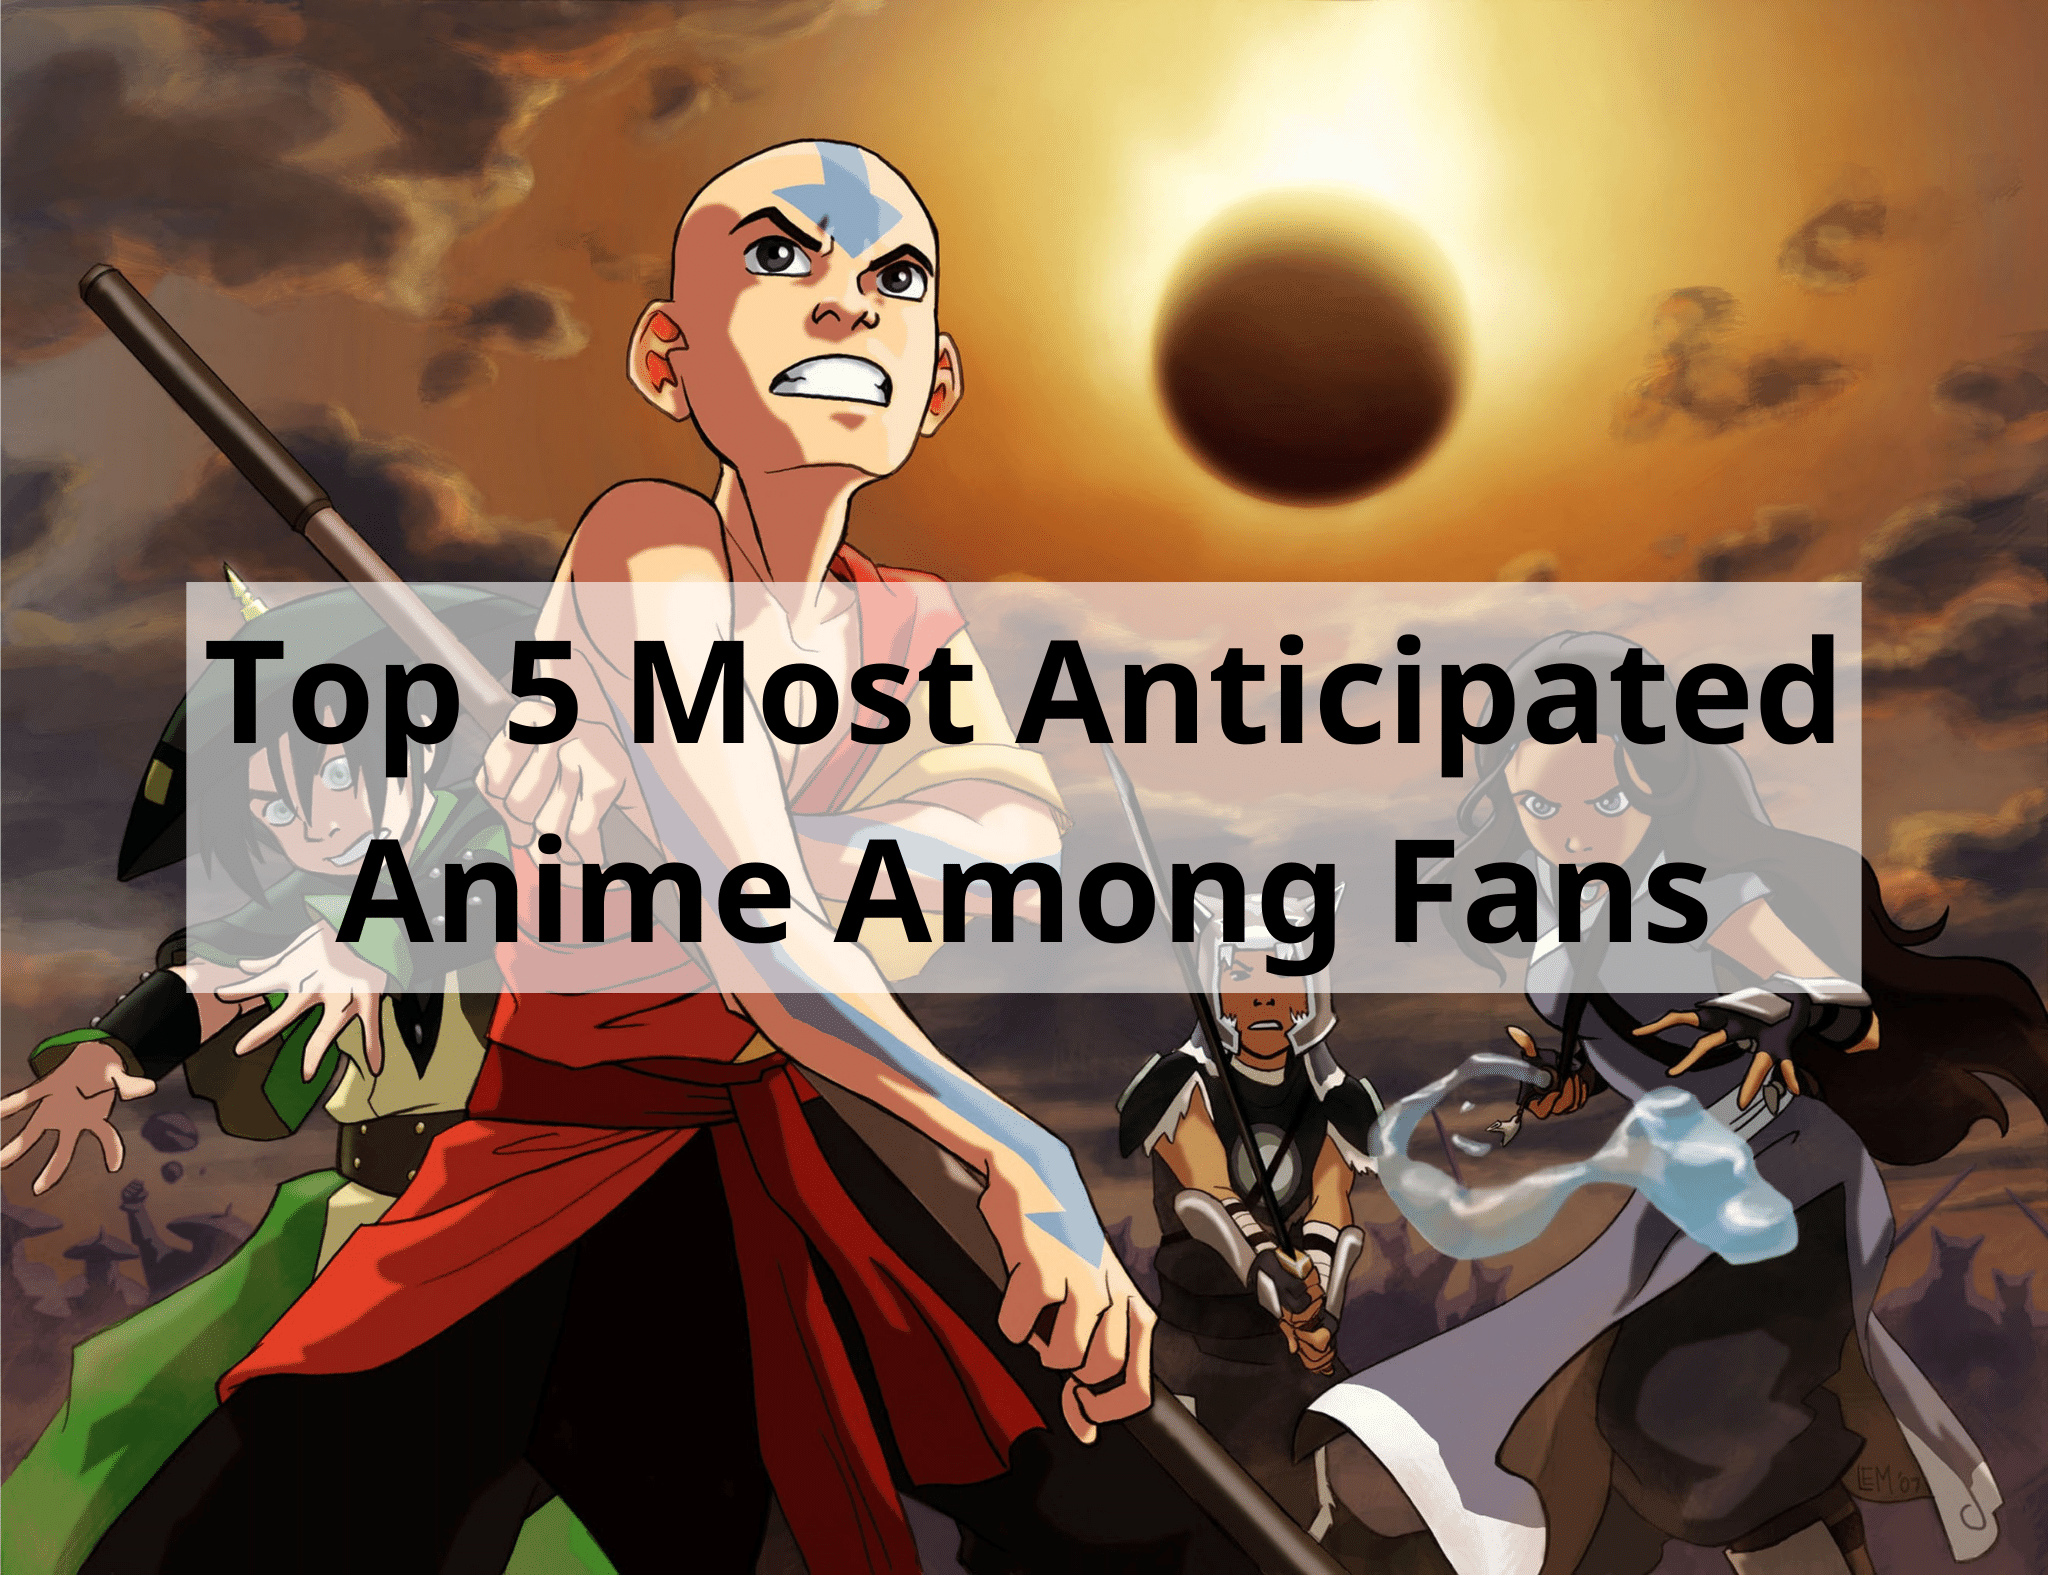 Top 5 Most Anticipated Anime Among Fans